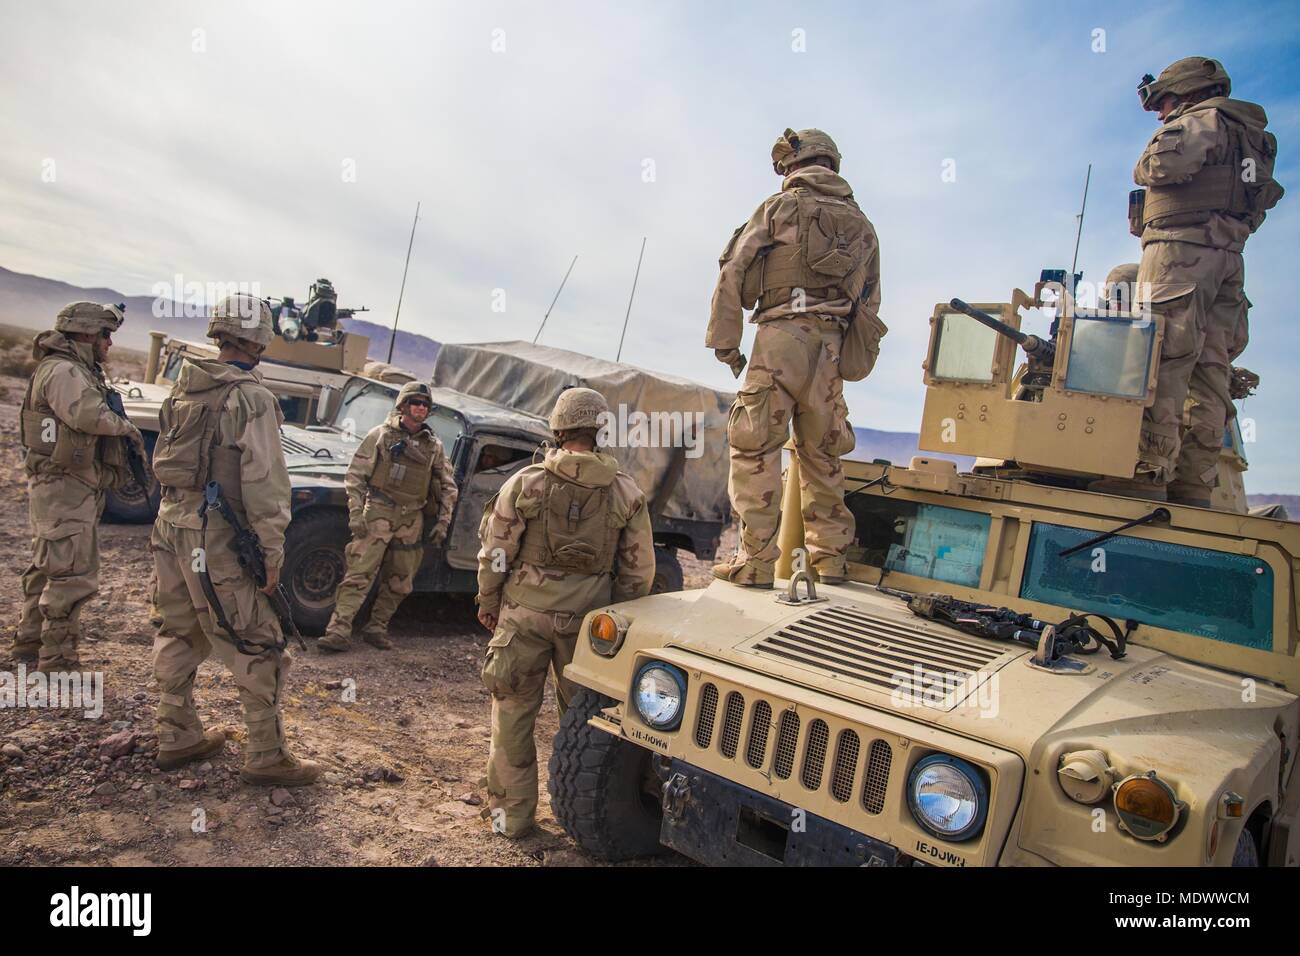 U.S. Marine Corps Sgt. Maj. William T. Sowers, center left, the Sgt. Maj. of 1st Marine Division, talks with Marines with TOW Platoon, 1st Tank Battalion, during a battle field circulation at Marine Corps Air Ground Combat Center, Twentynine Palms, Calif., Dec. 10, 2017. Foster accompanied U.S. Marine Corps Maj. Gen. Eric M. Smith, the commanding general for 1st Marine Division, as he visited various units participating in exercise Steel Knight 2018. (U.S. Marines Corps photo by Staff Sgt. Gabriela Garcia) Stock Photo